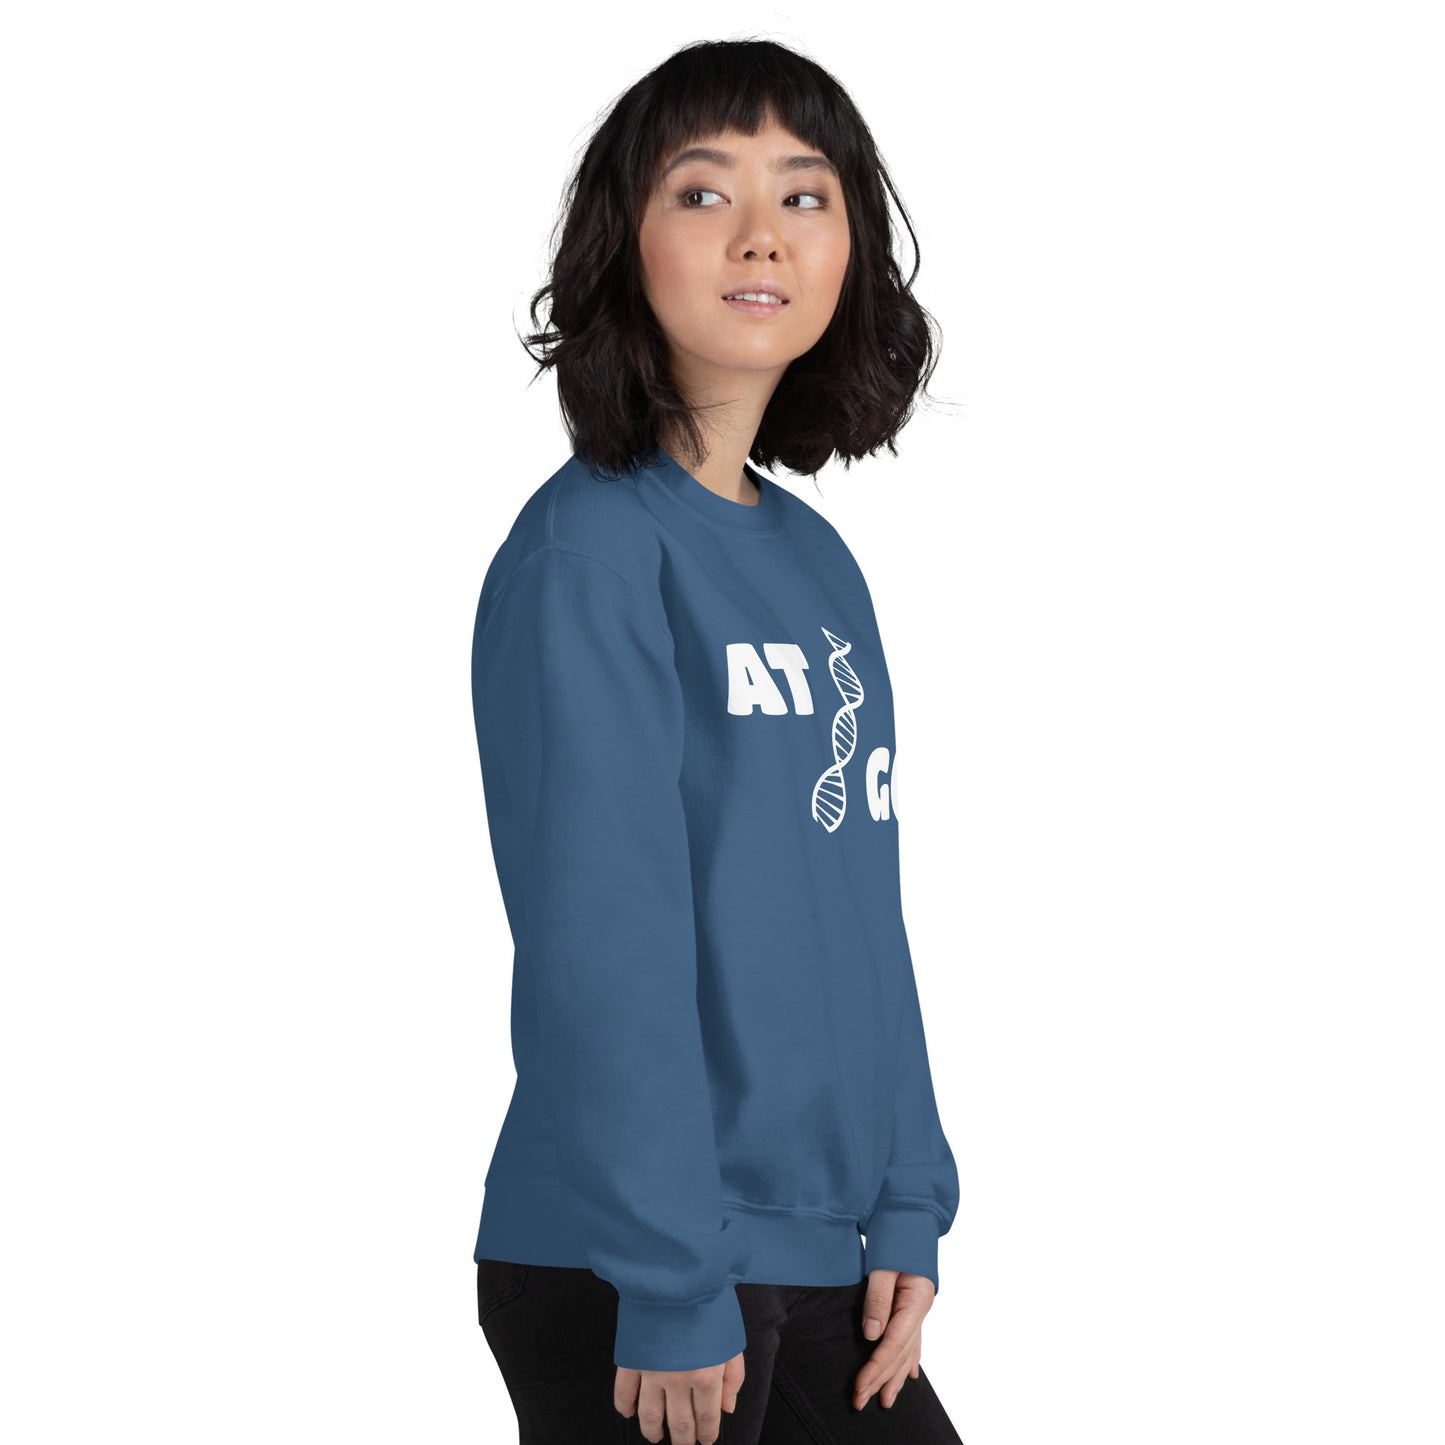 Women with indigo blue sweatshirt with image of a DNA string and the text "ATGC"